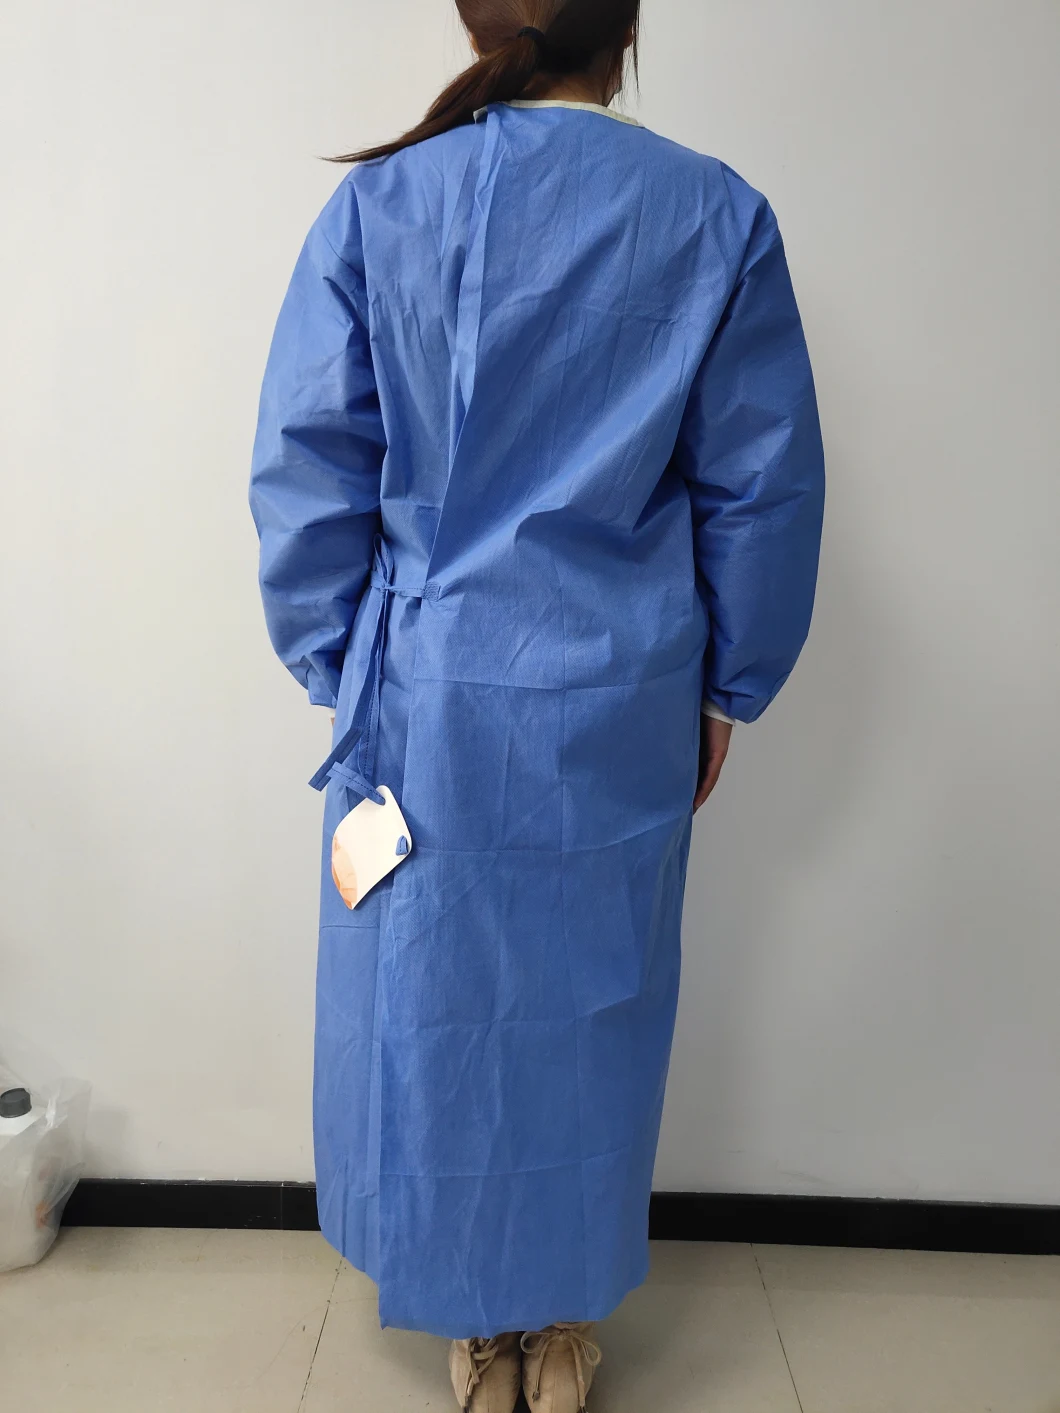 Light Weight Non-Woven Surgical Disposable Clothing for Doctors